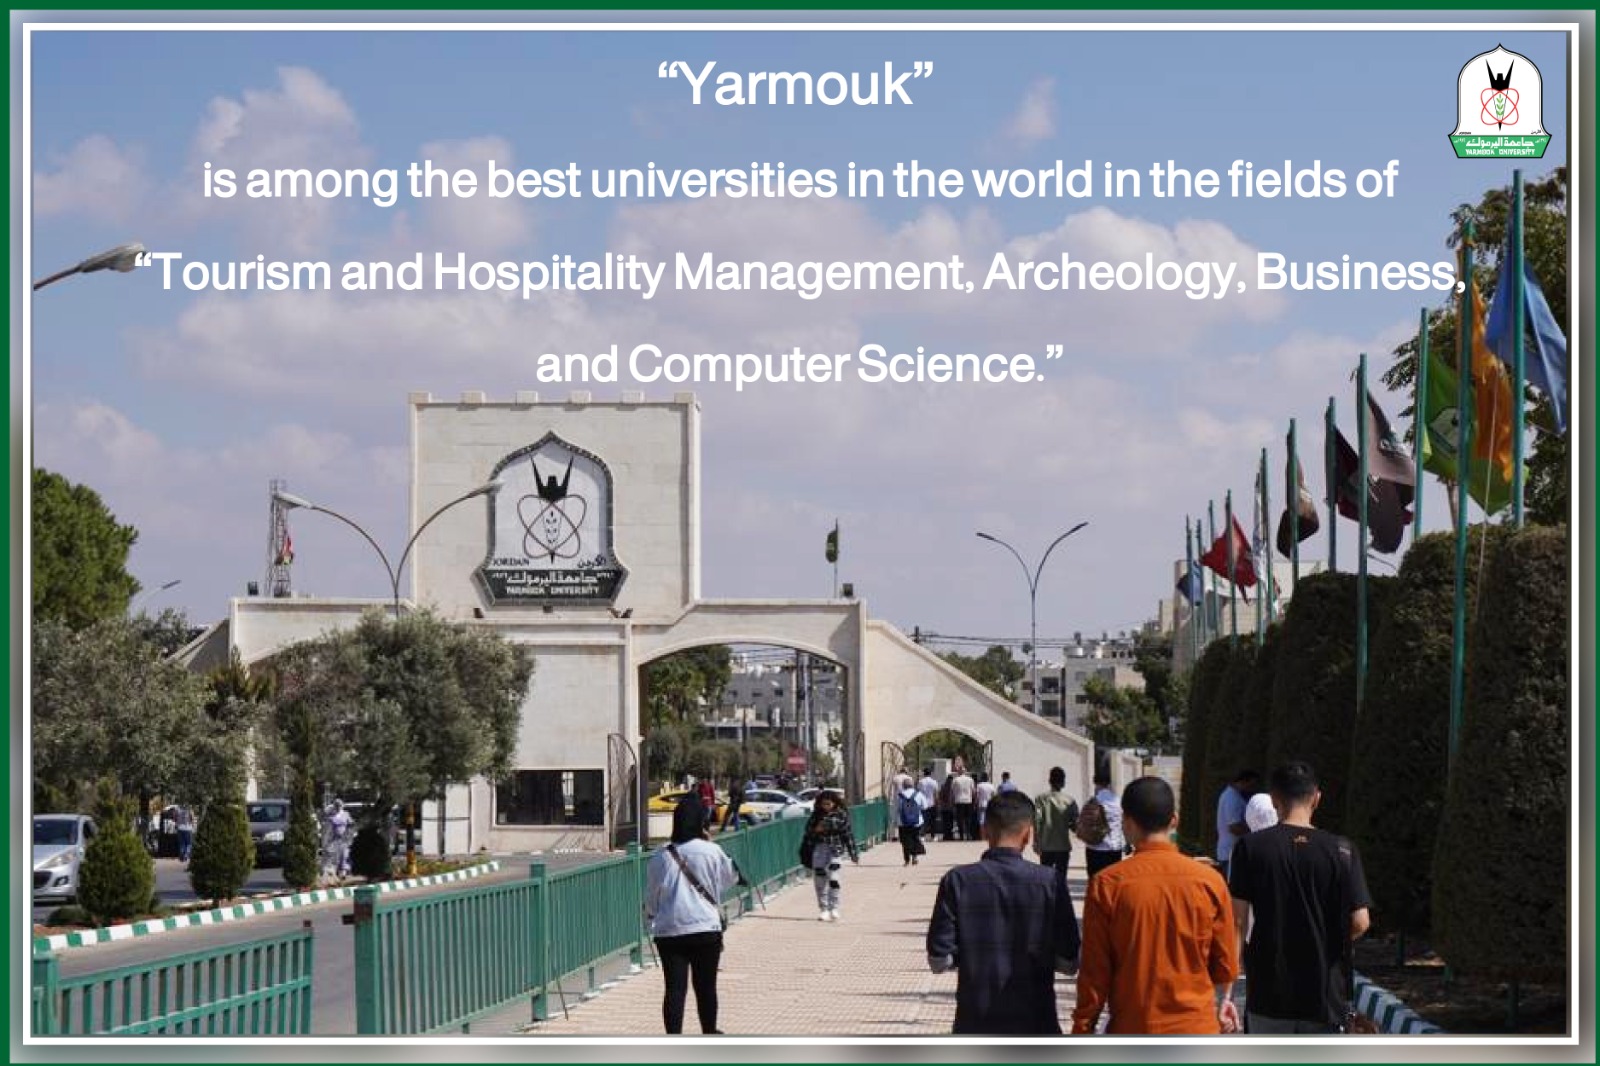 Yarmouk is Among the Best Universities in the World in the Fields of “Tourism and Hospitality Management, Archeology, Business, and Computer Science”